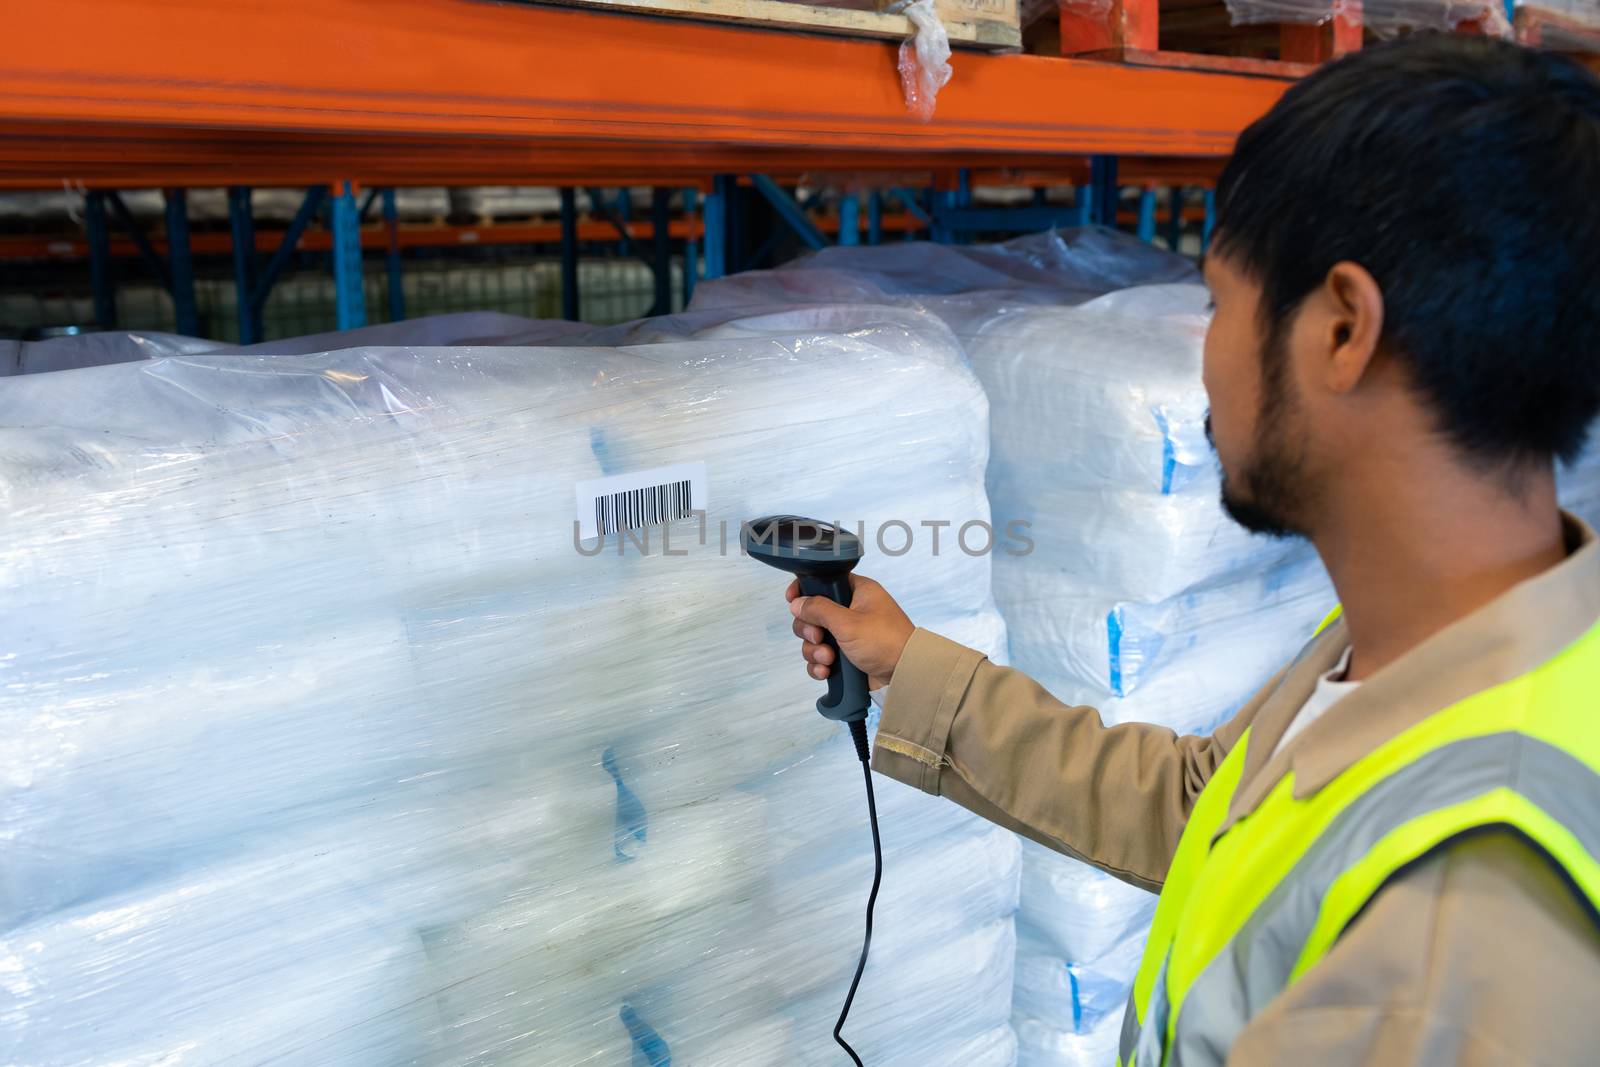 Male worker scanning package with barcode scanner in modern warehouse by Wavebreakmedia